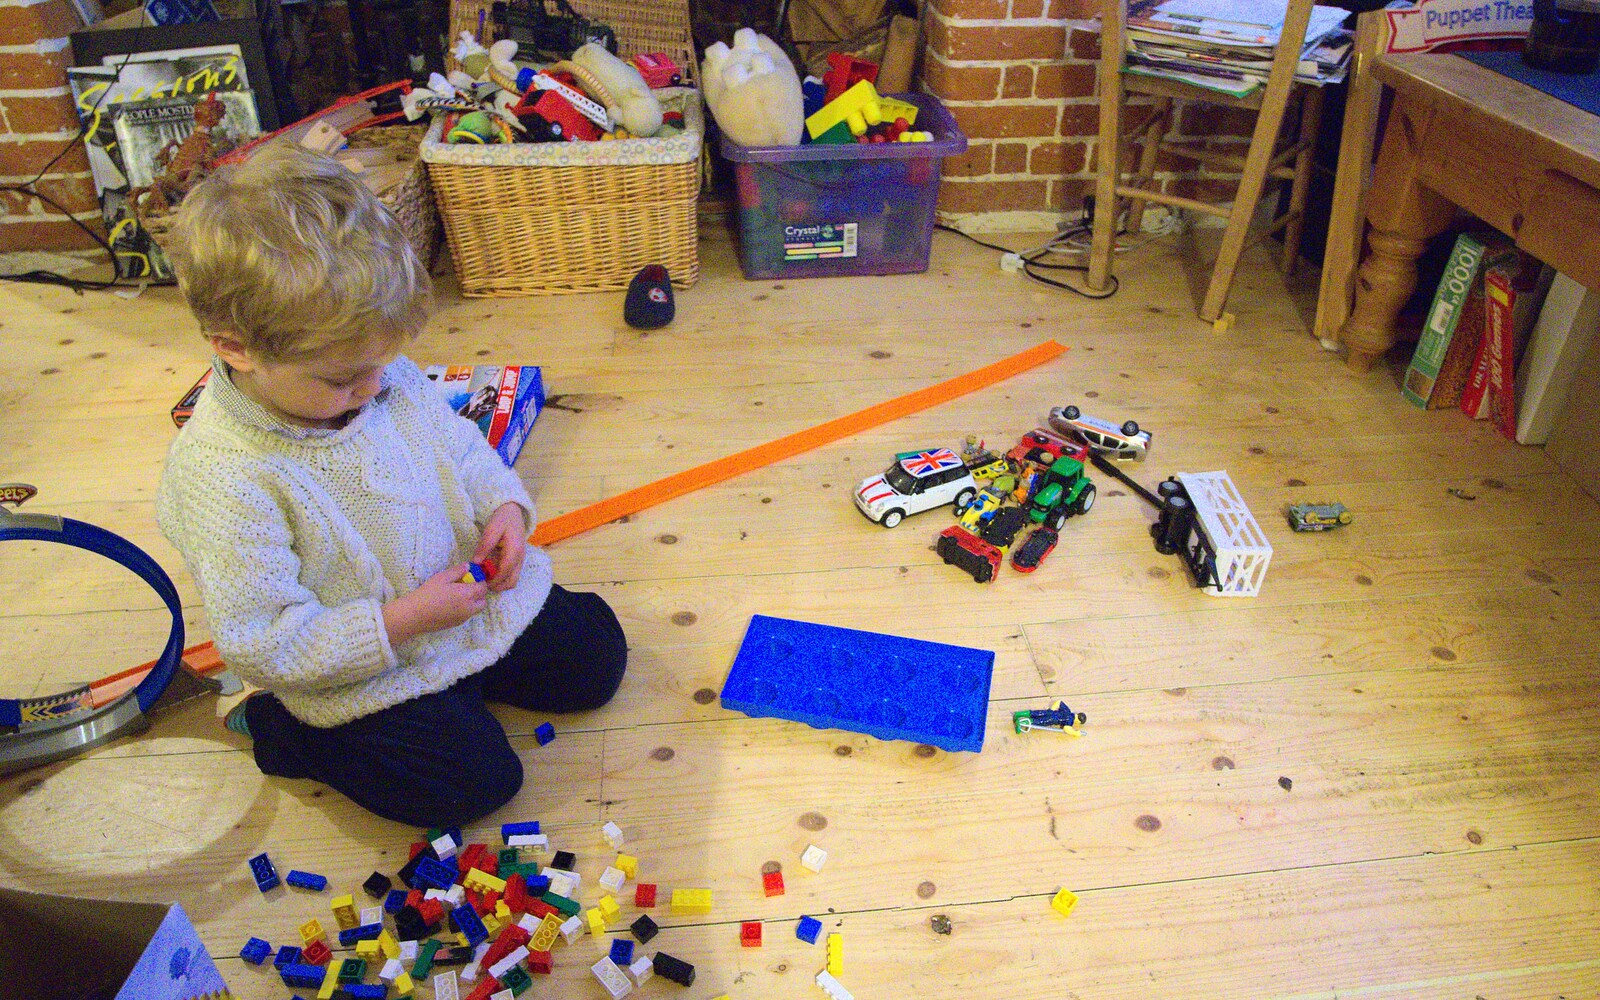 Fred plays with Lego from Christmas Day in the Swan Inn, Brome, Suffolk - 25th December 2011